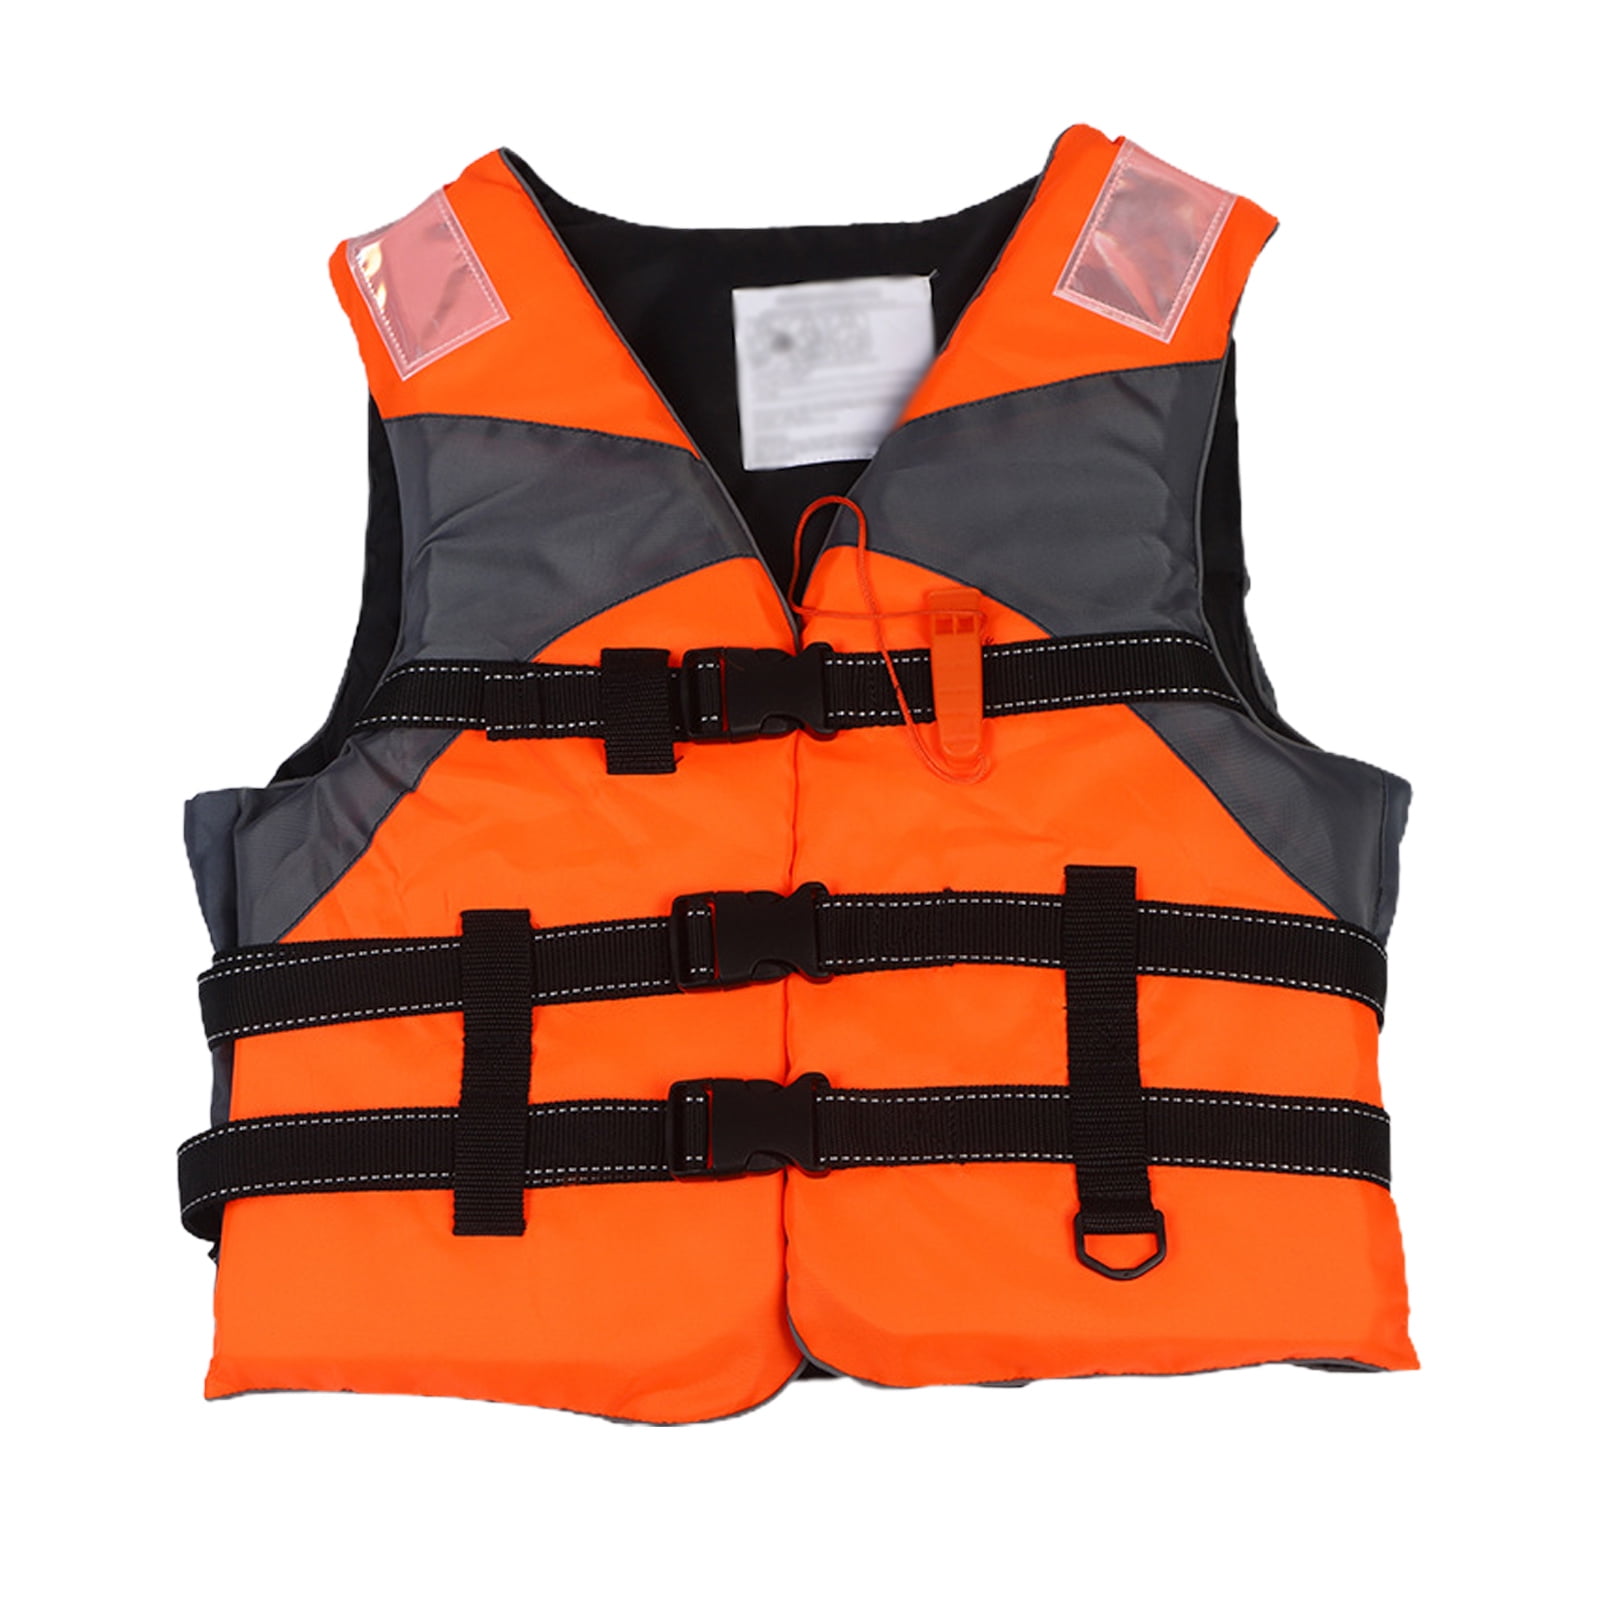 Life Jackets for adults Vest Survival Swimming Life Vest Water Sport Jacket Life Vests for Sailing Watersport Boating Kayaking Jacket Surfing Vest Waistcoat for Sailing/20-120kg Life Jacket Adult